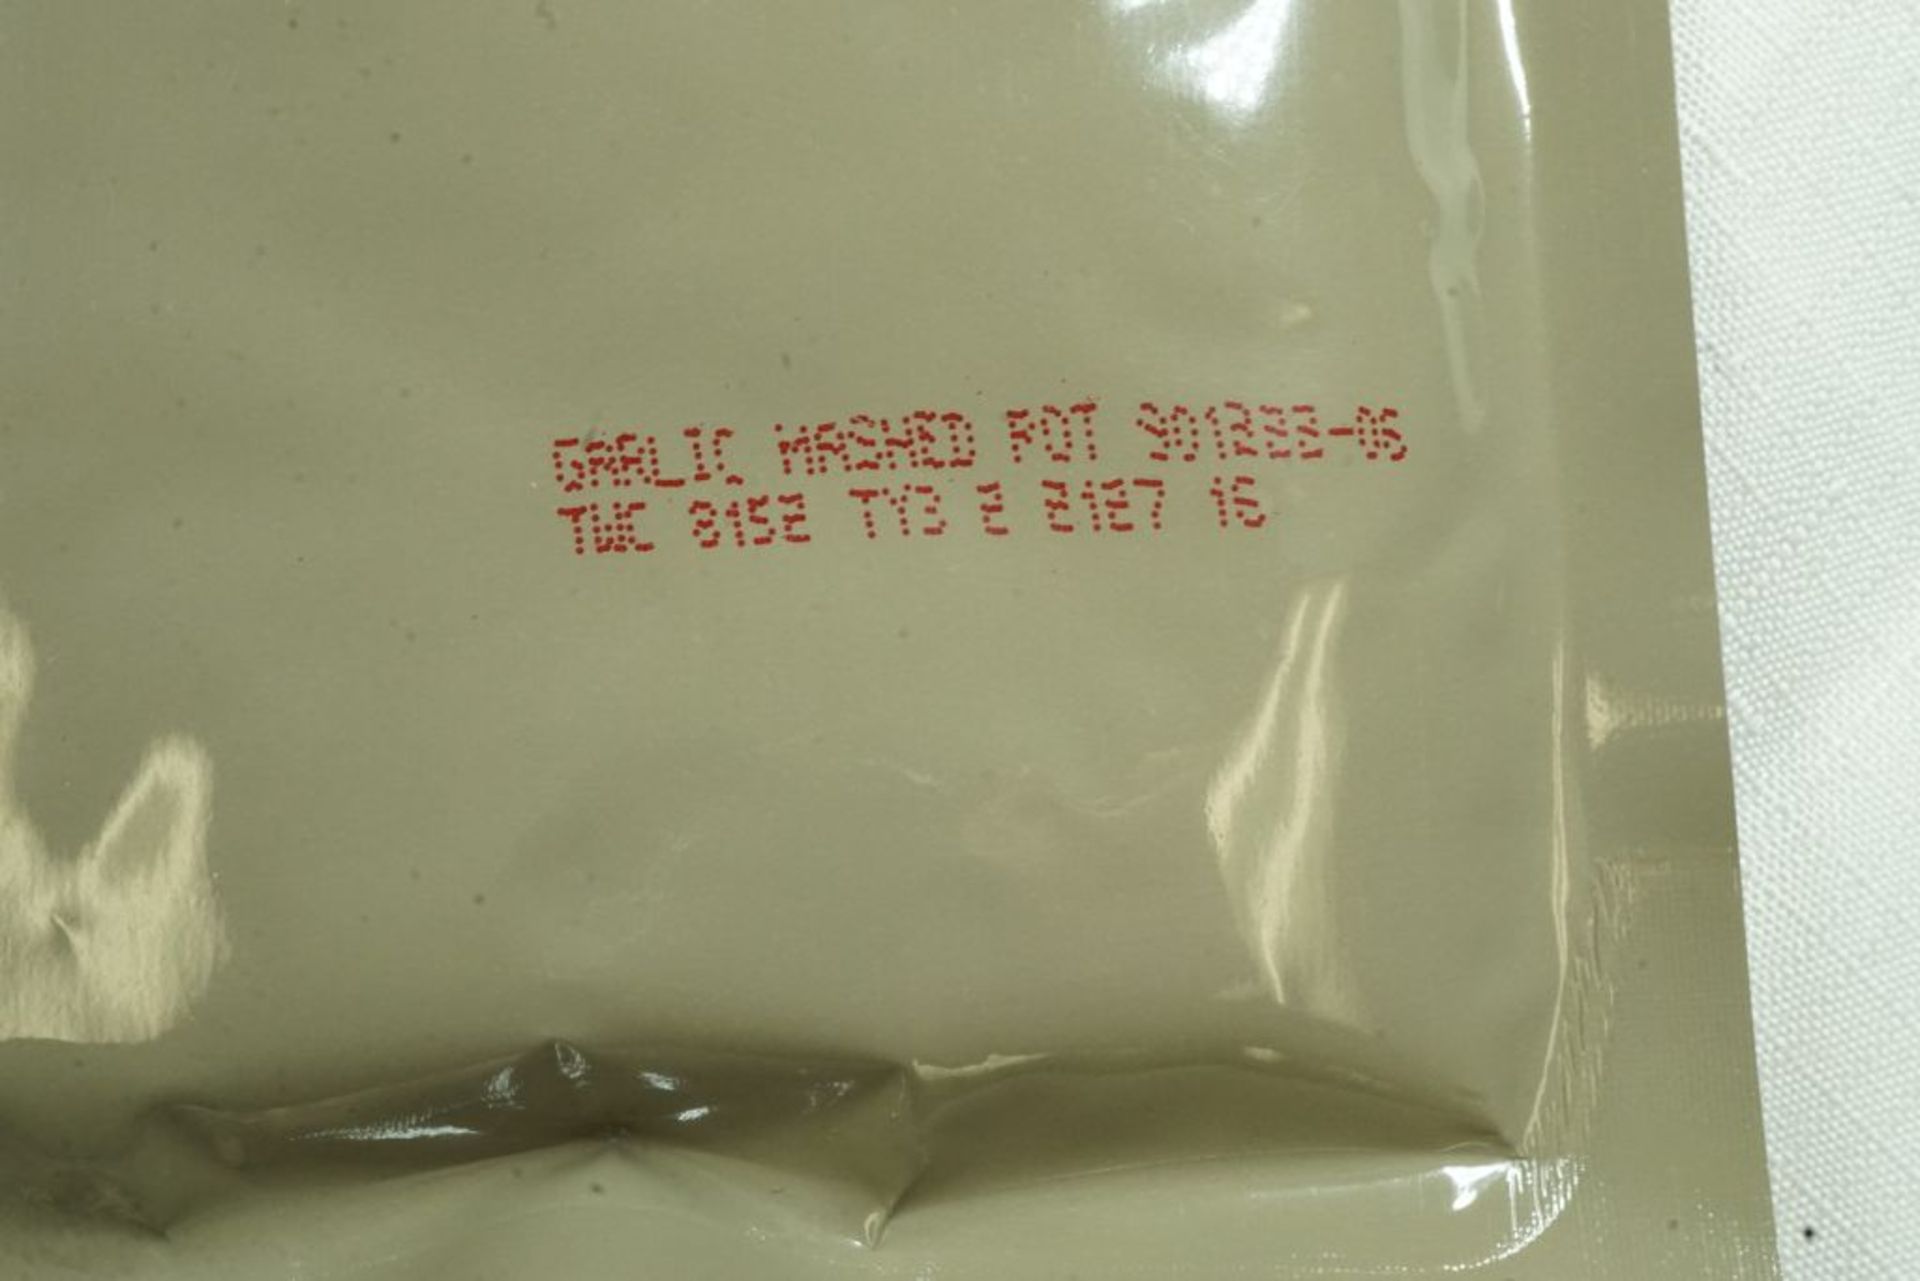 Lot of (48) Cases of XMRE Meals - Extended Shelf Life Meal, Ready to Eat - Image 8 of 16